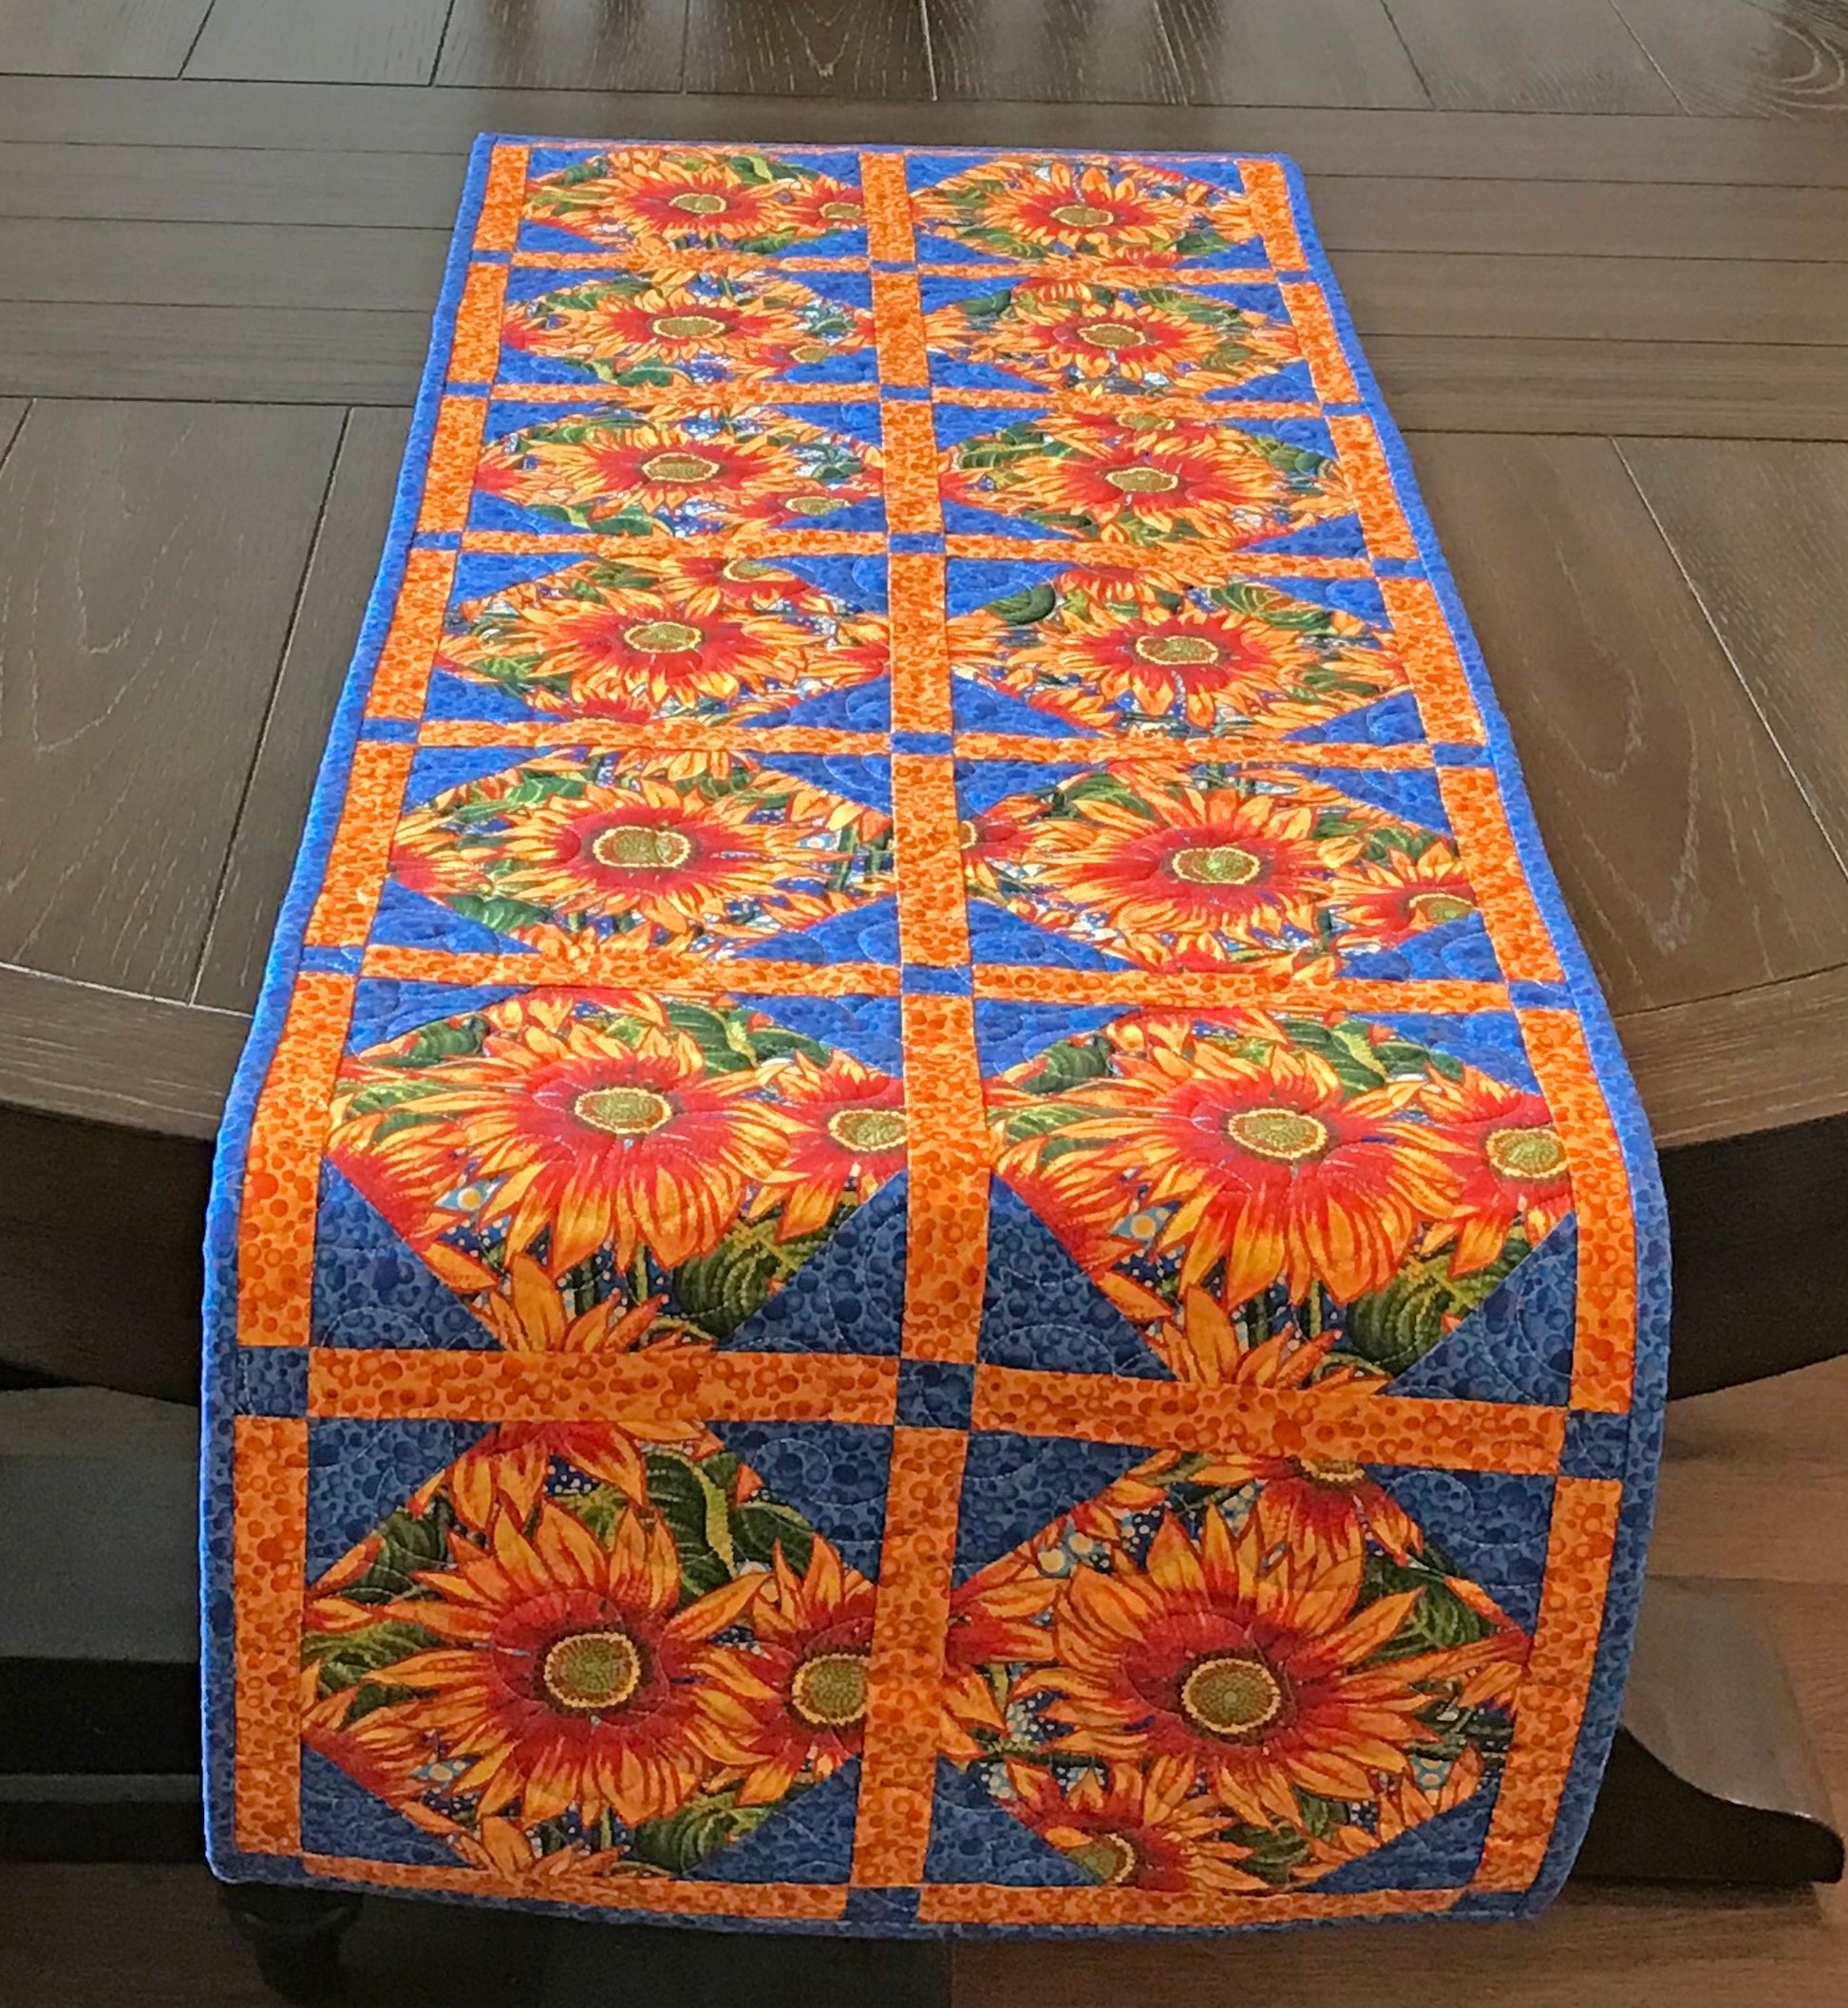 Sunflower Themed Table Runner - Handmade Quilts, Digital Patterns, and Home Décor items online - Cuddle Cat Quiltworks